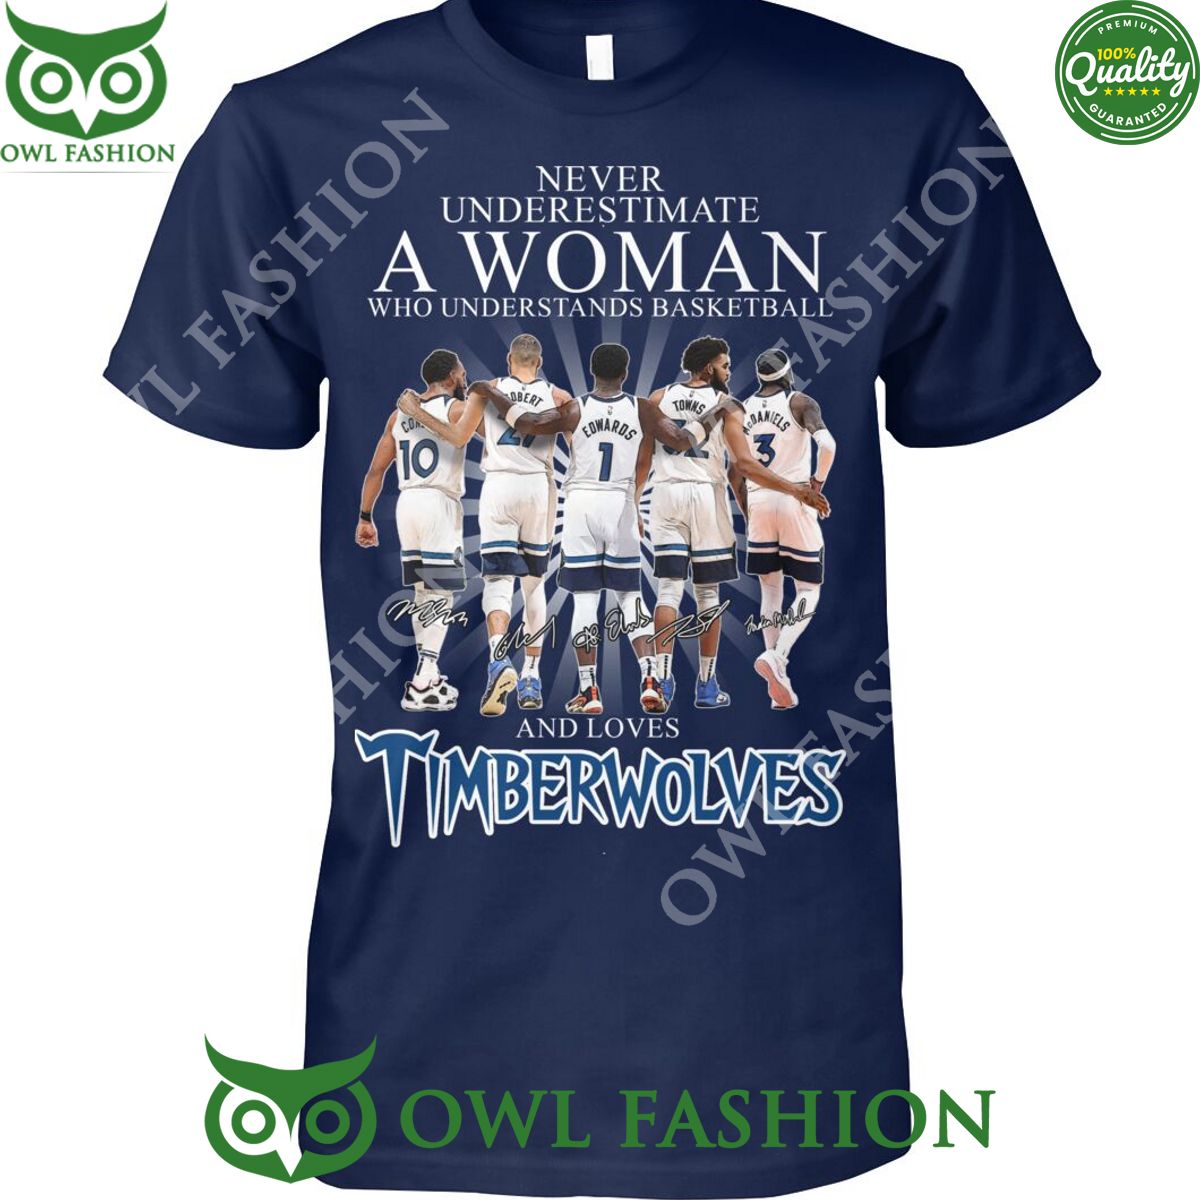 never underrestimate a woman who understand basketball and loves minnesota timberwolves t shirt 1 q218t.jpg